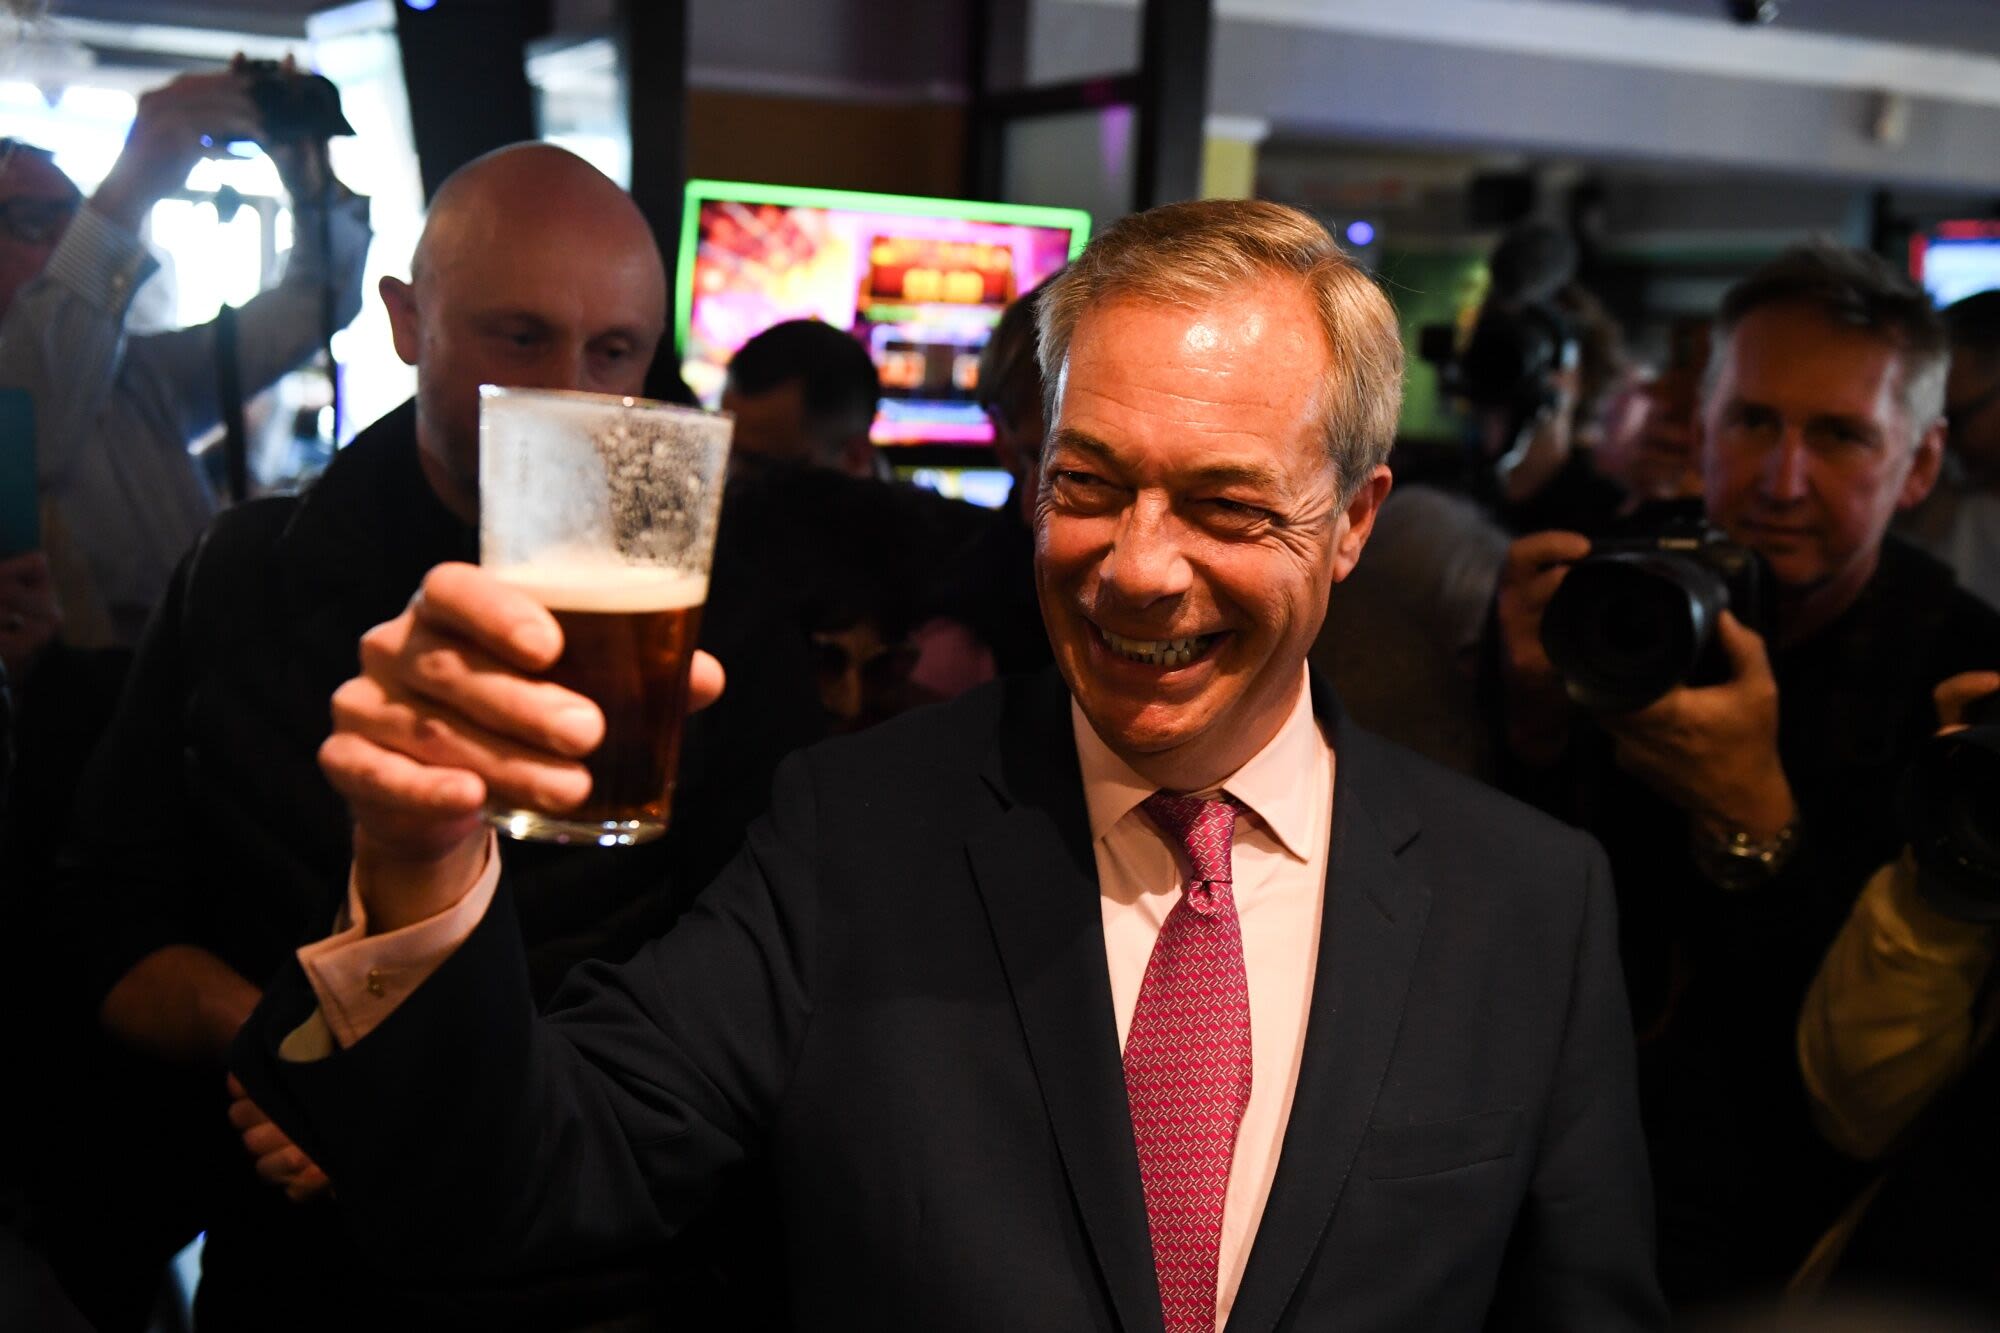 Conservative Donors Flirt With Farage as Fight for UK Election Money Heats Up